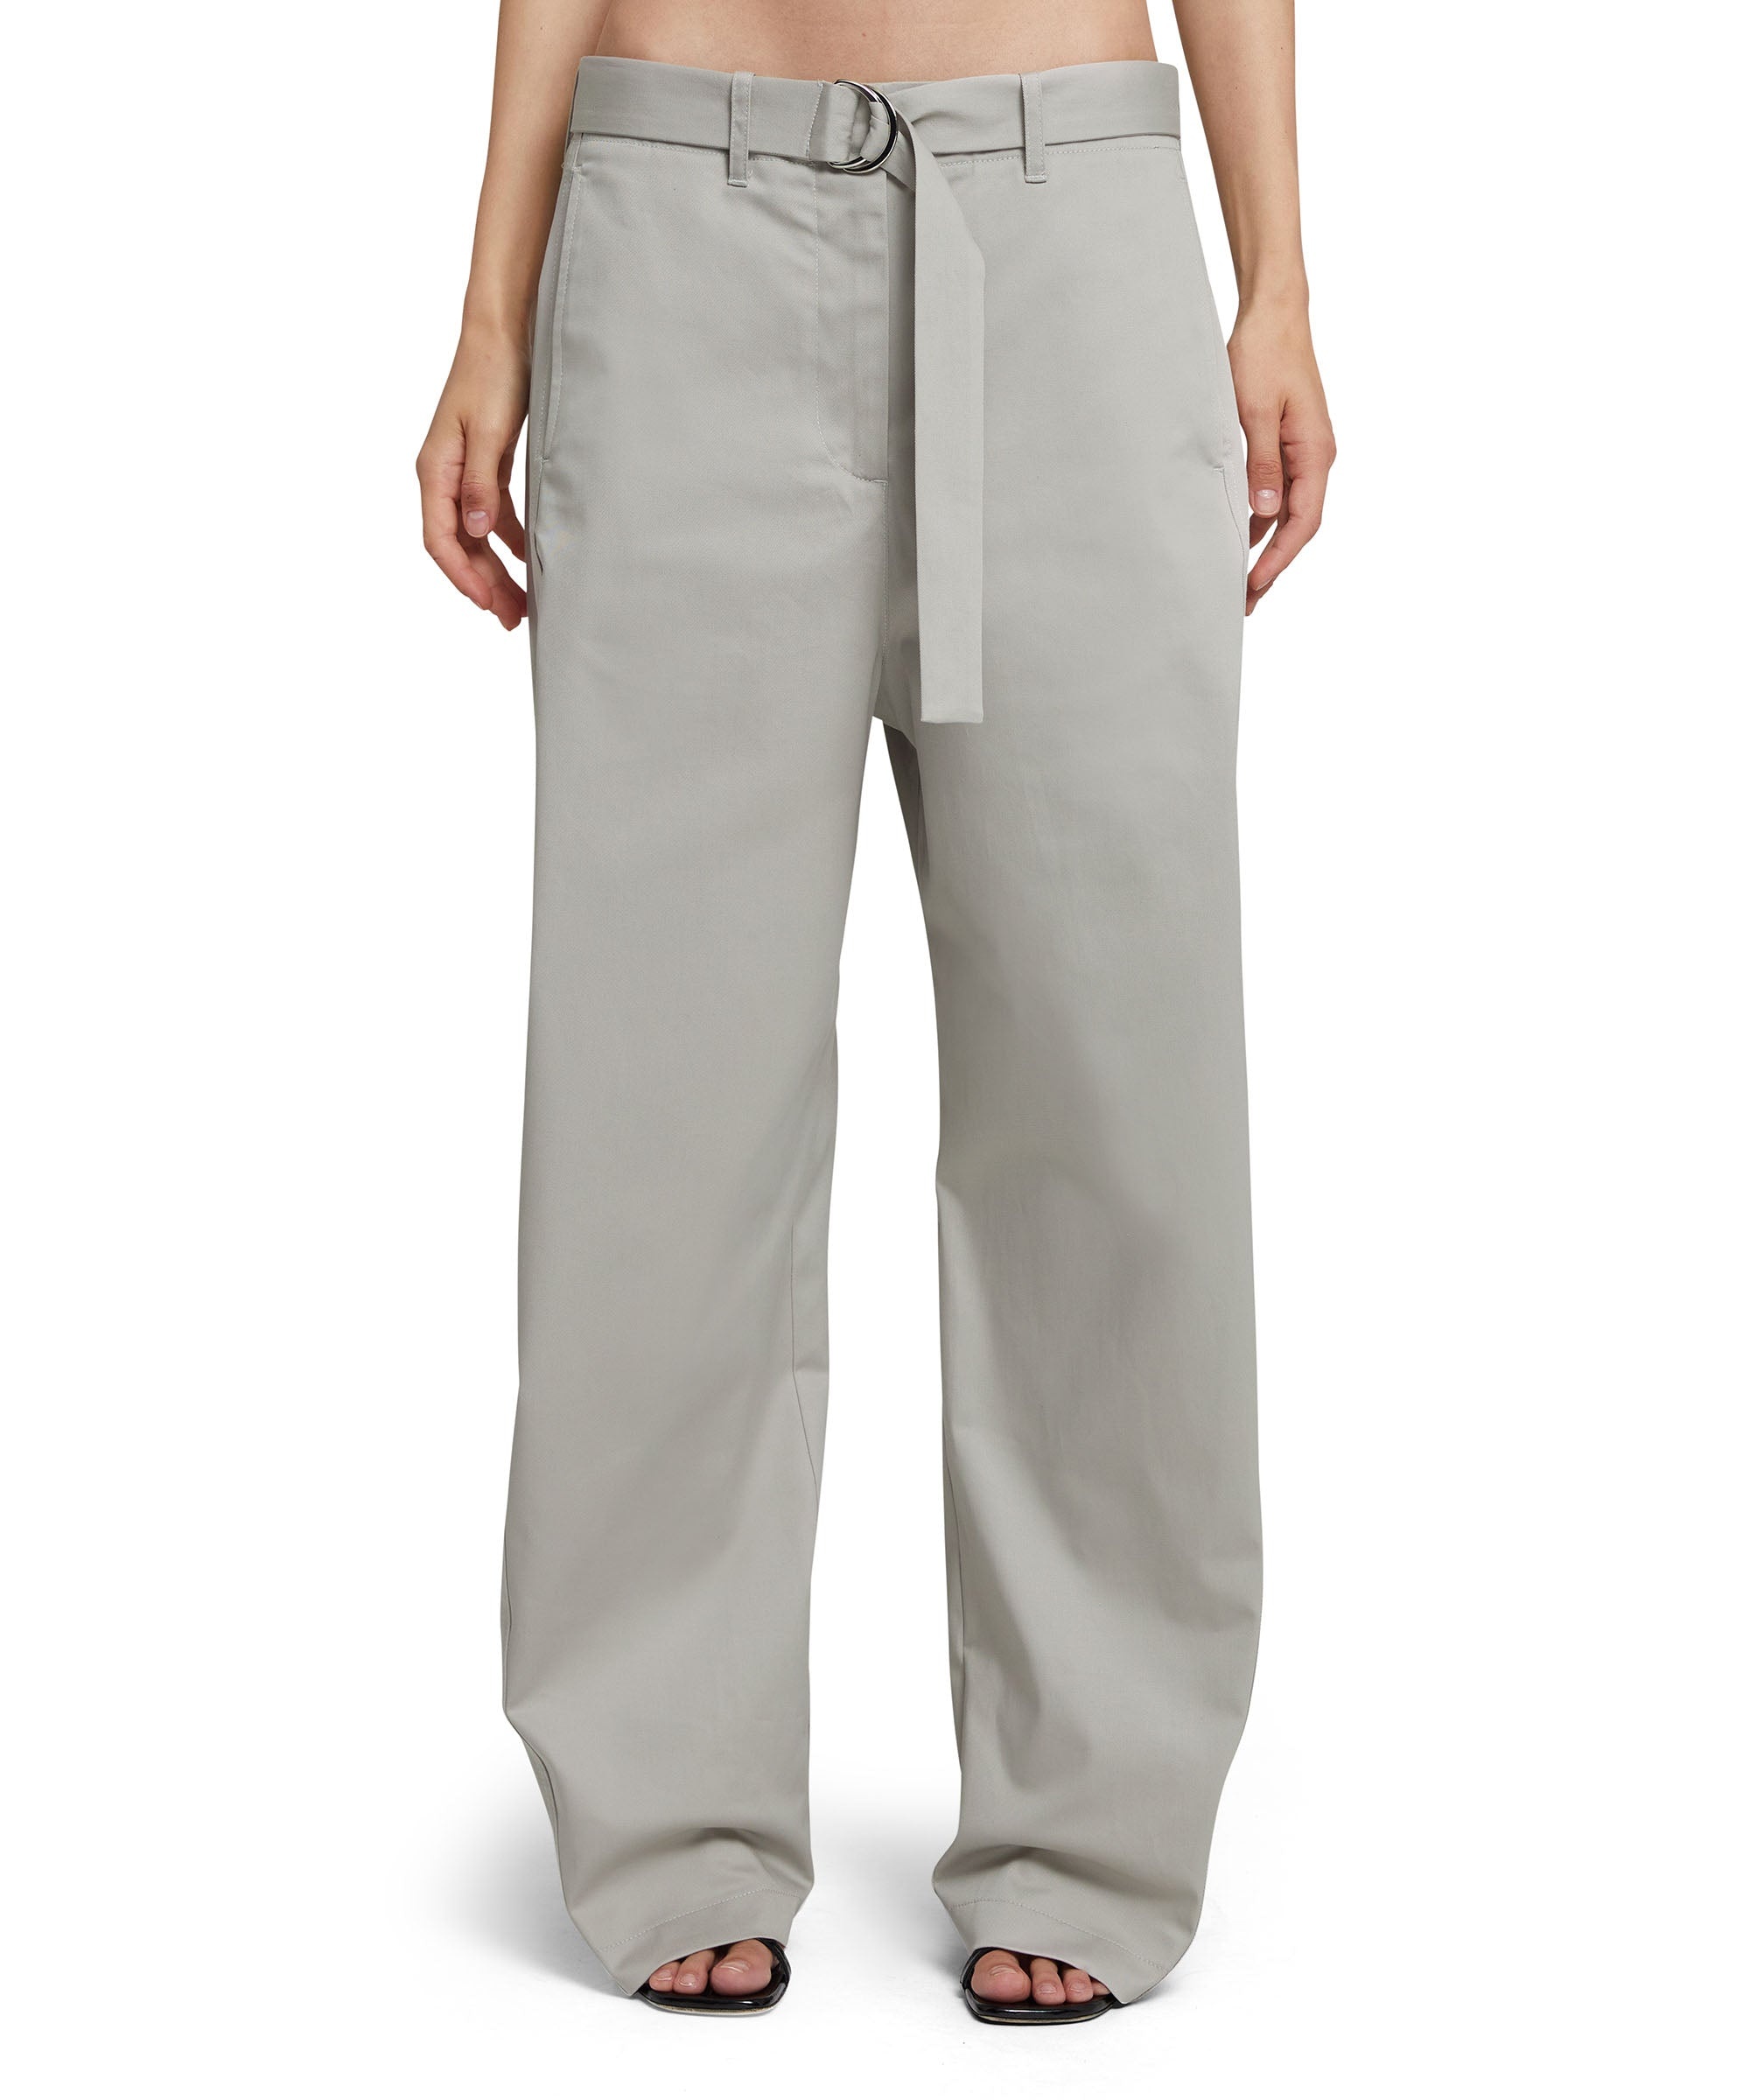 Stretch cotton gabardine pants with belted waist - 2